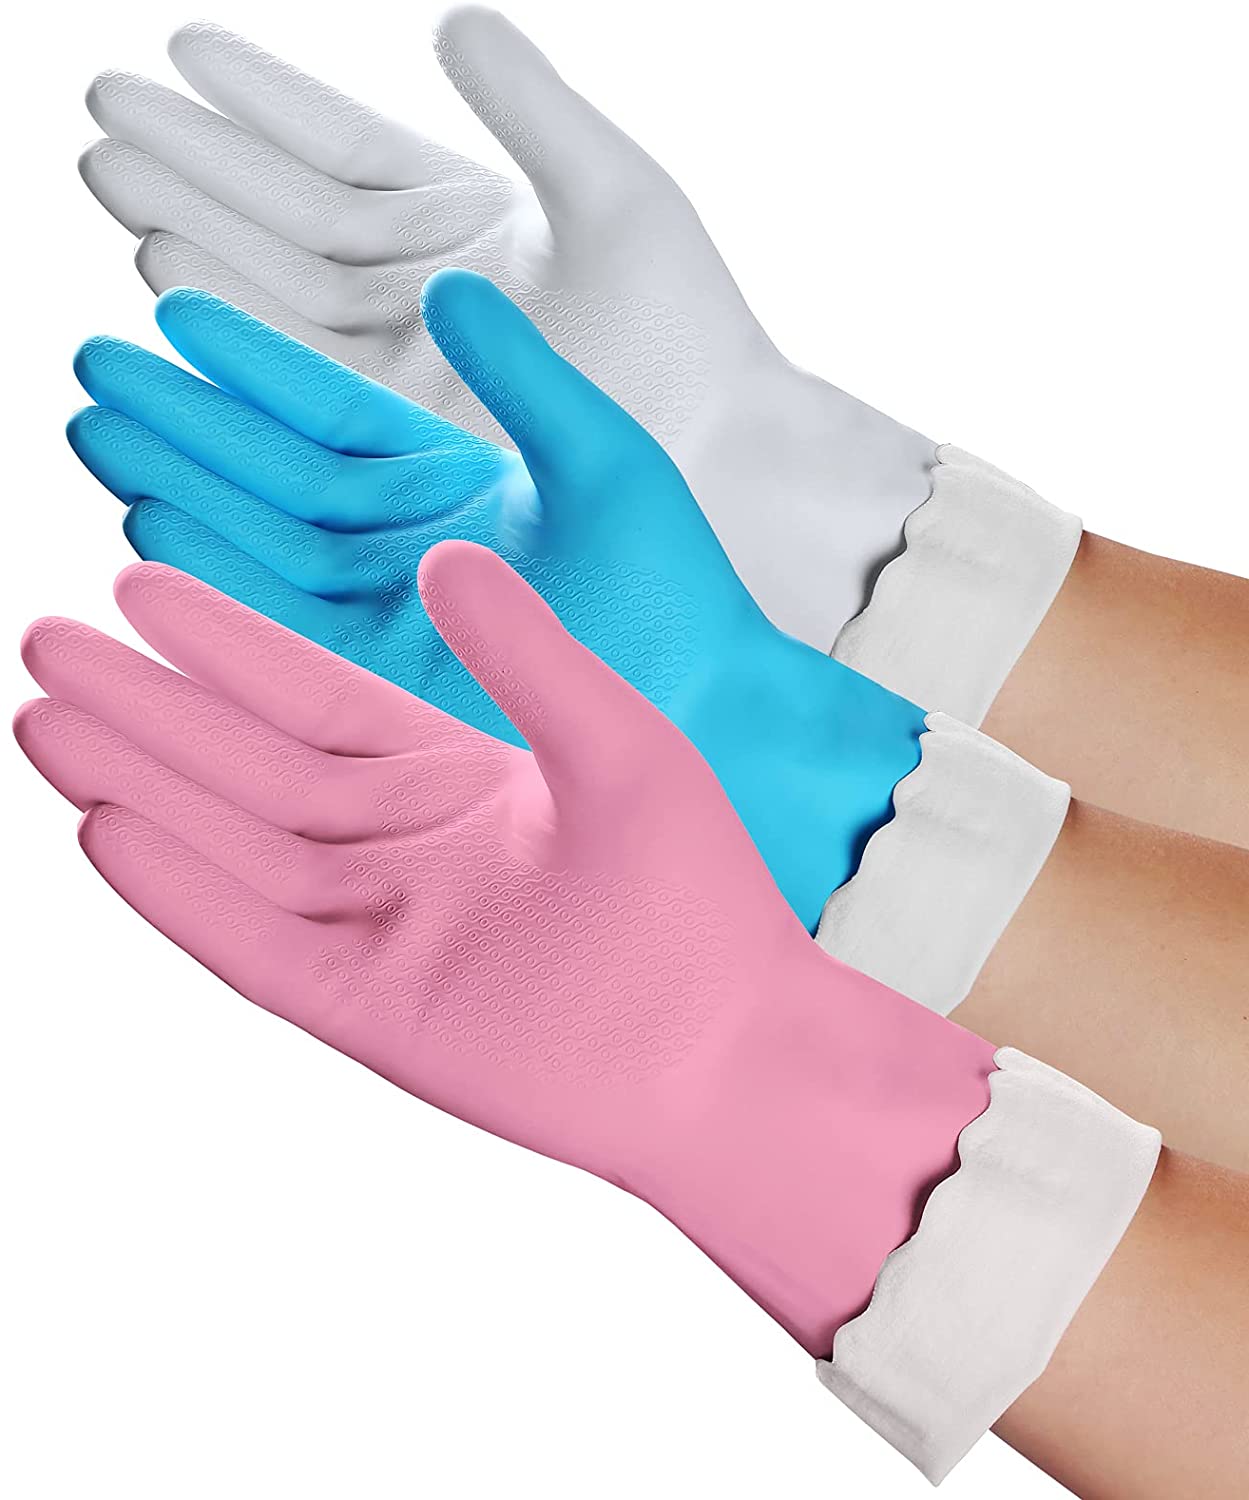 Household Cleaning Gloves - Reusable Kitchen Dishwashing Gloves with Latex free